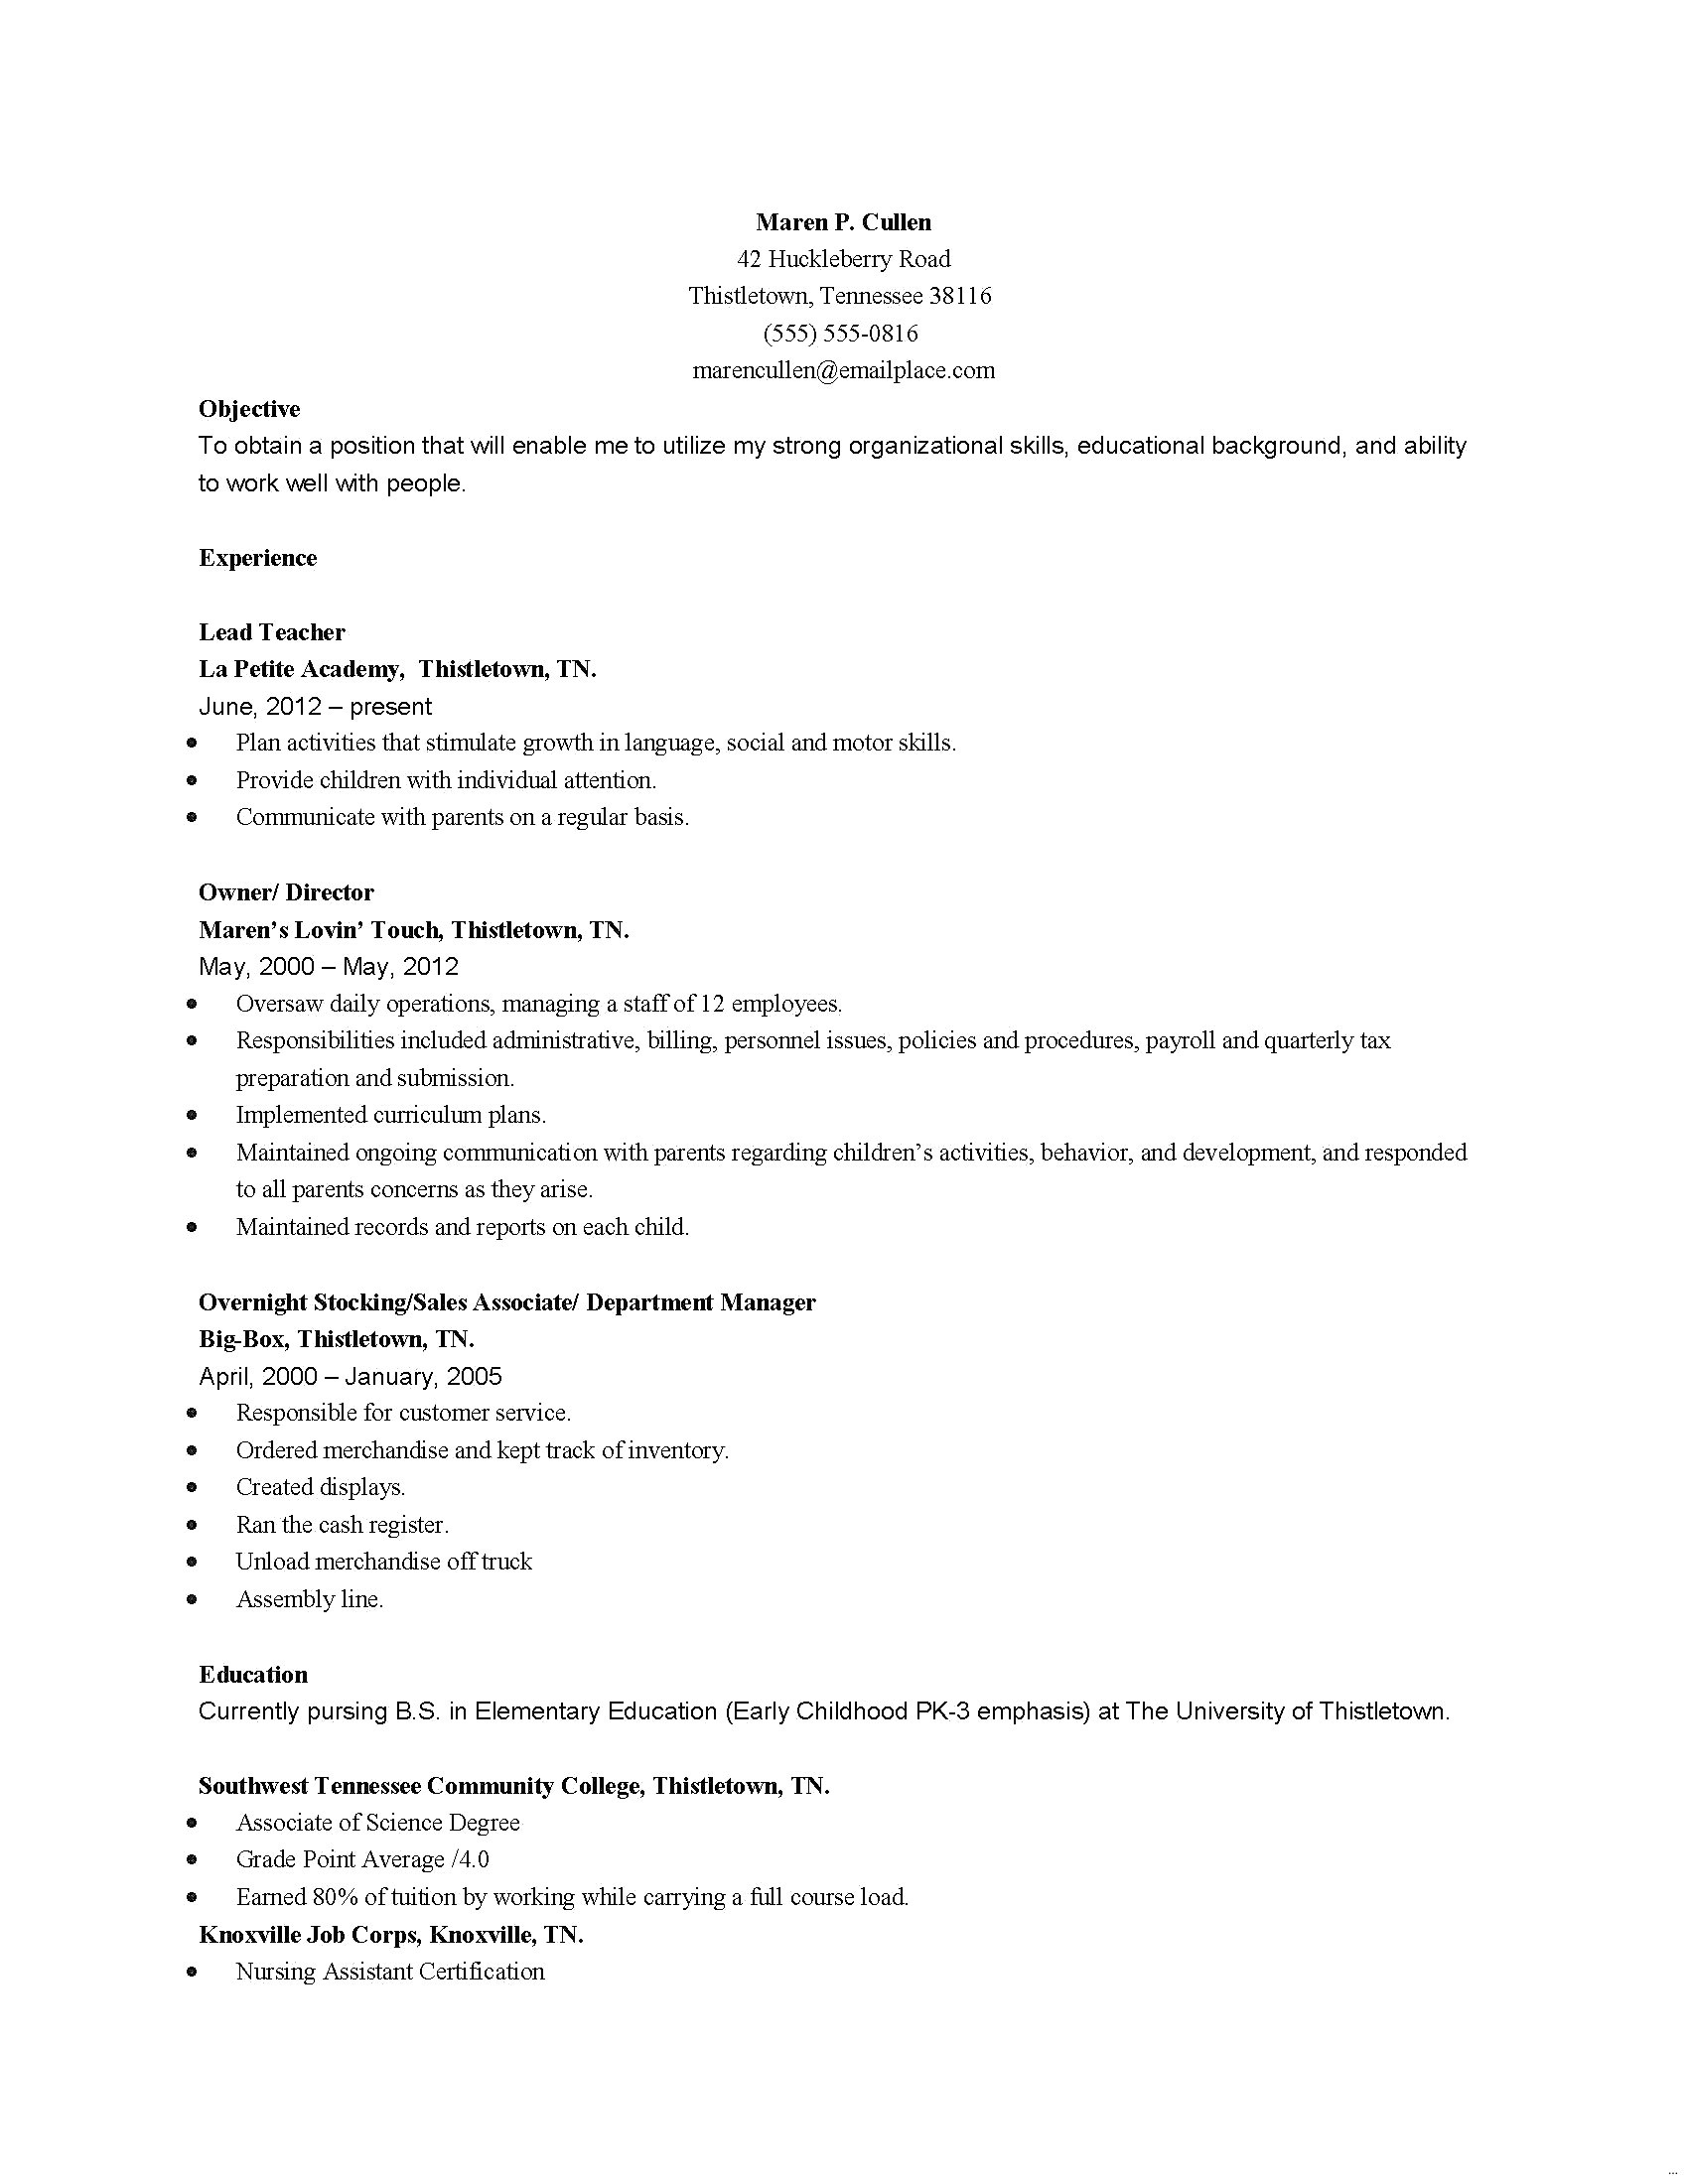 early childhood education resume cover letter